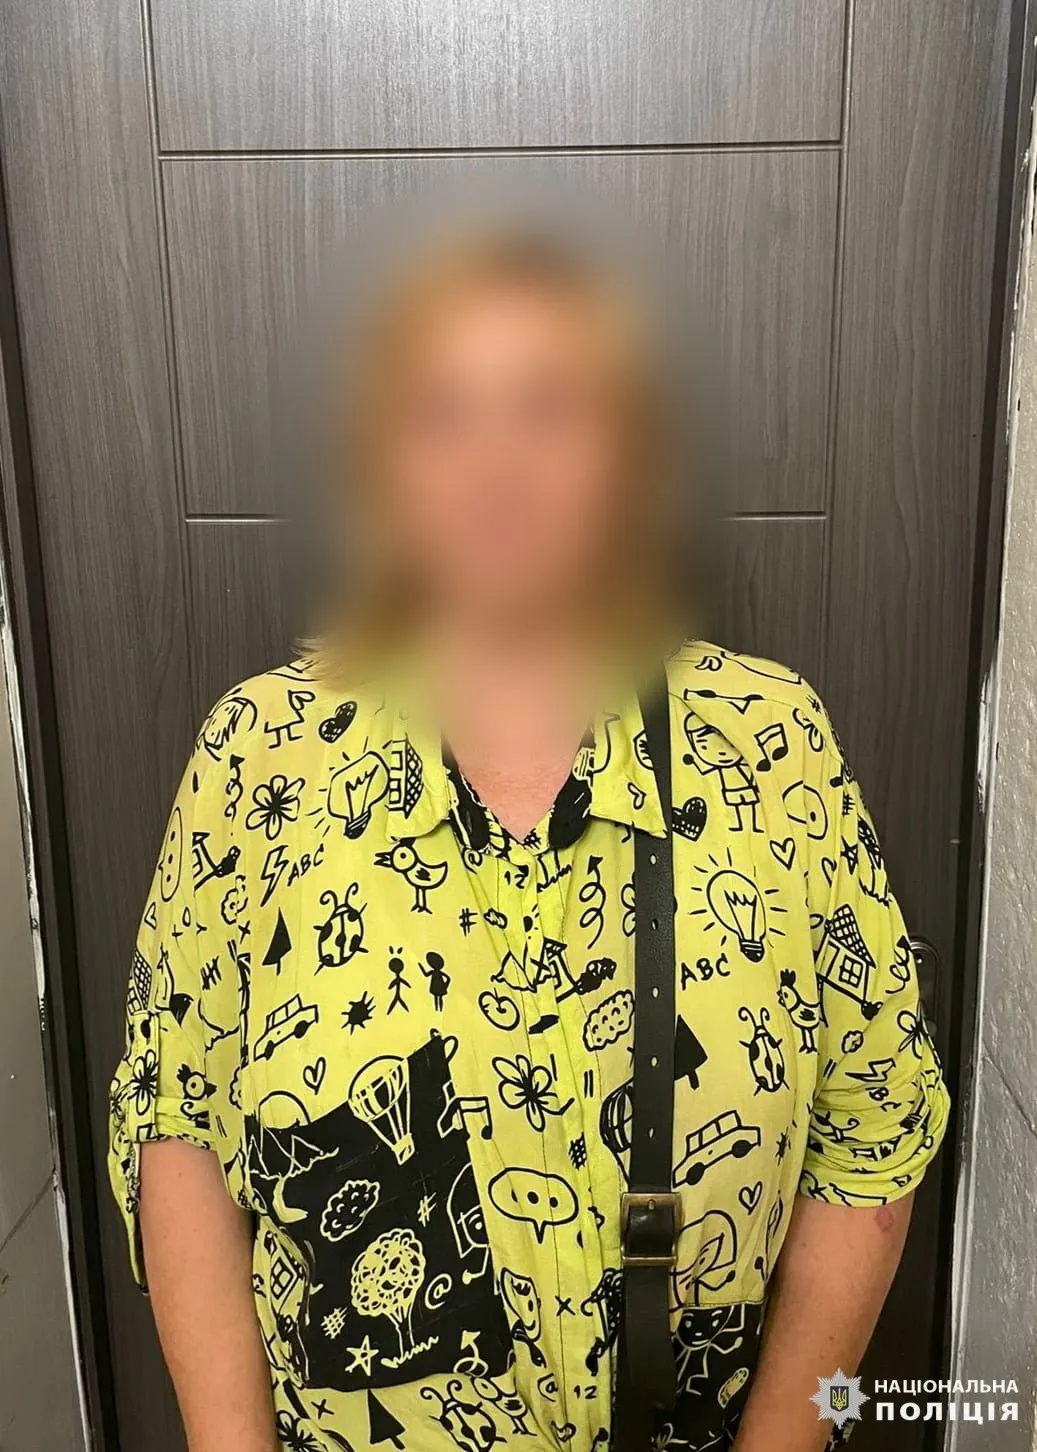 in-kharkiv-a-woman-illegally-received-her-deceased-mothers-pension-for-2-years